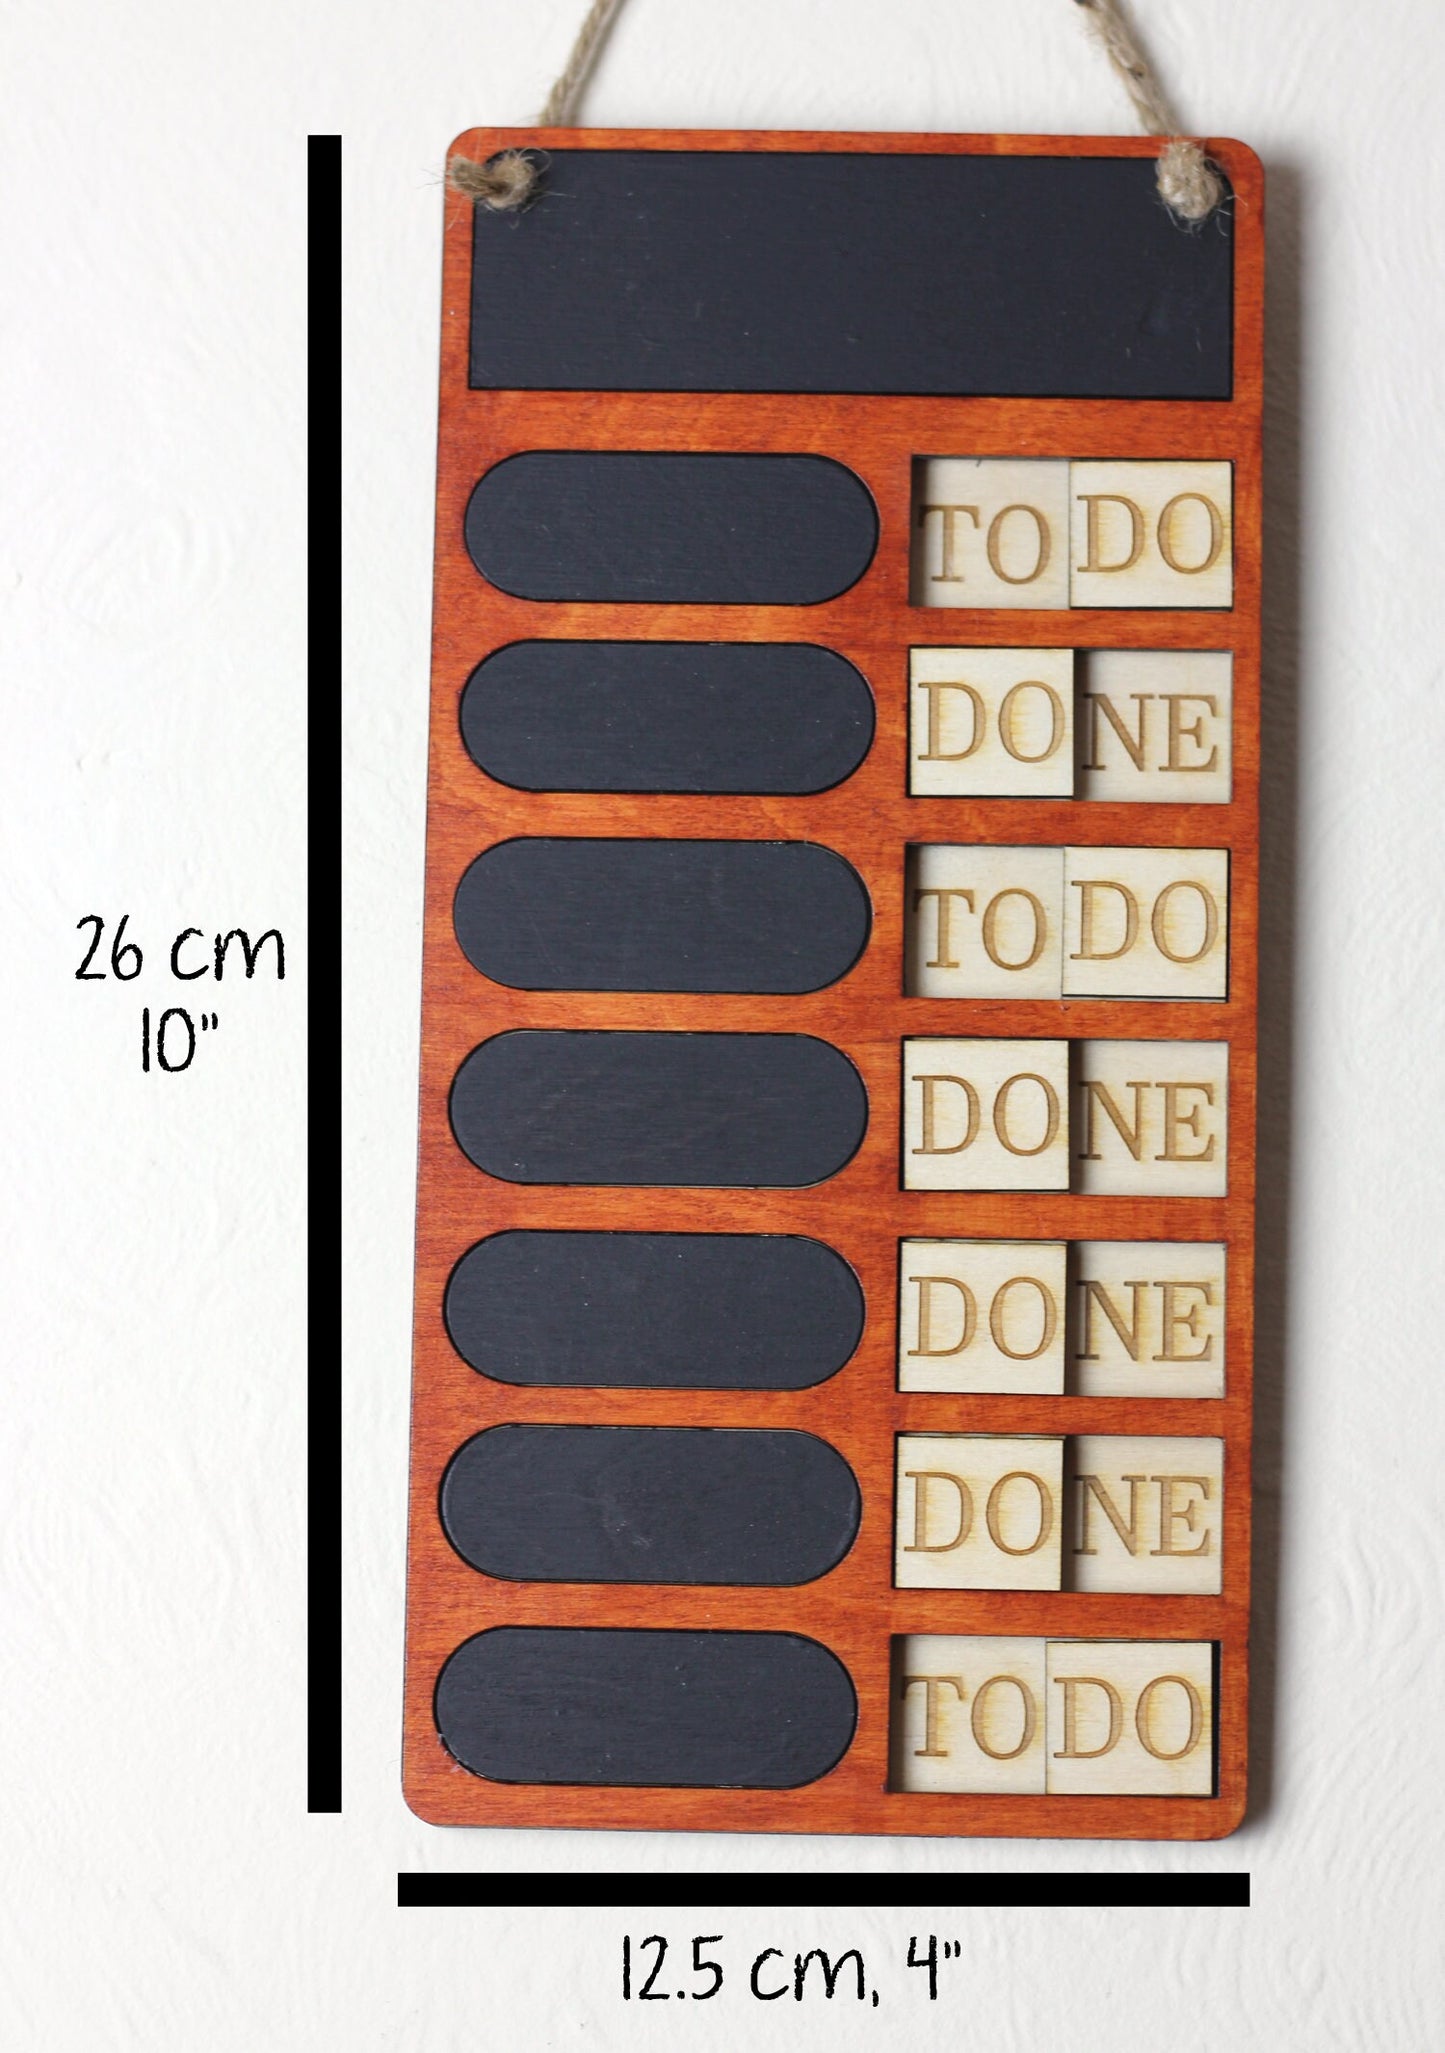 Custom wooden chore chart, record chores and tasks on this editable weekly chore board, wooden to do and task tracker, make it magnetic